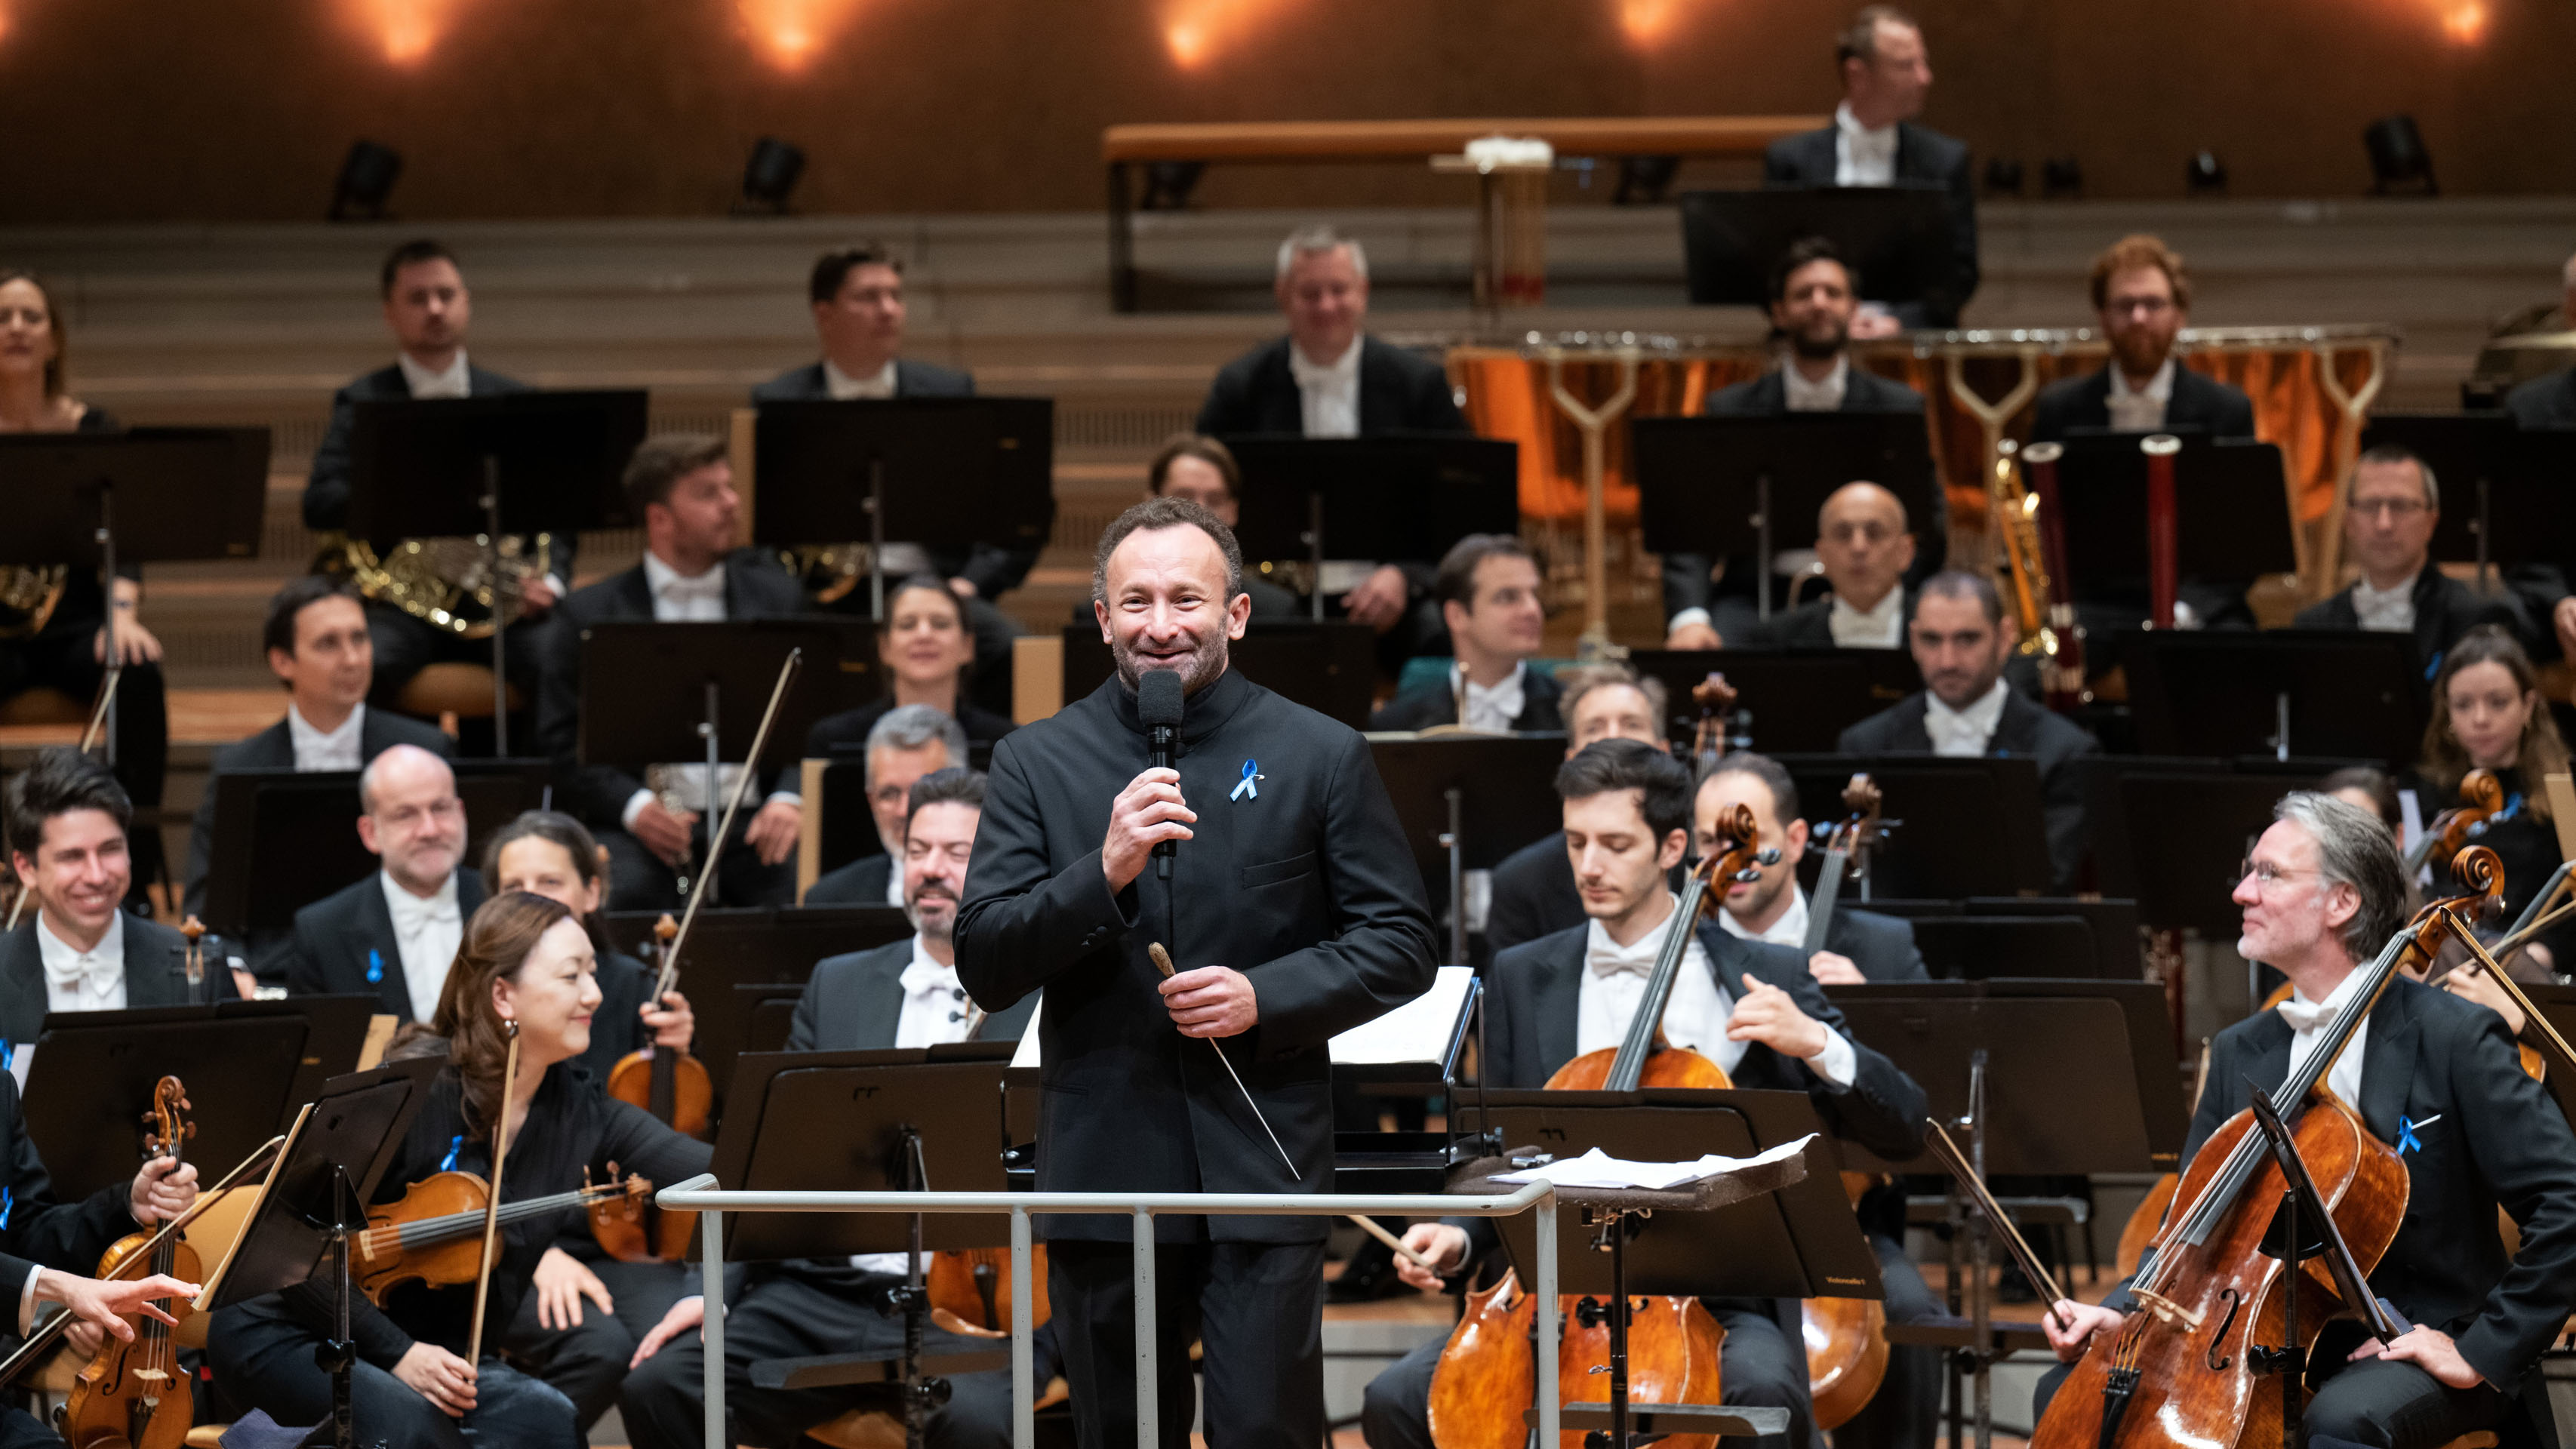 Kirill Petrenko with microphone in front of the orchestra